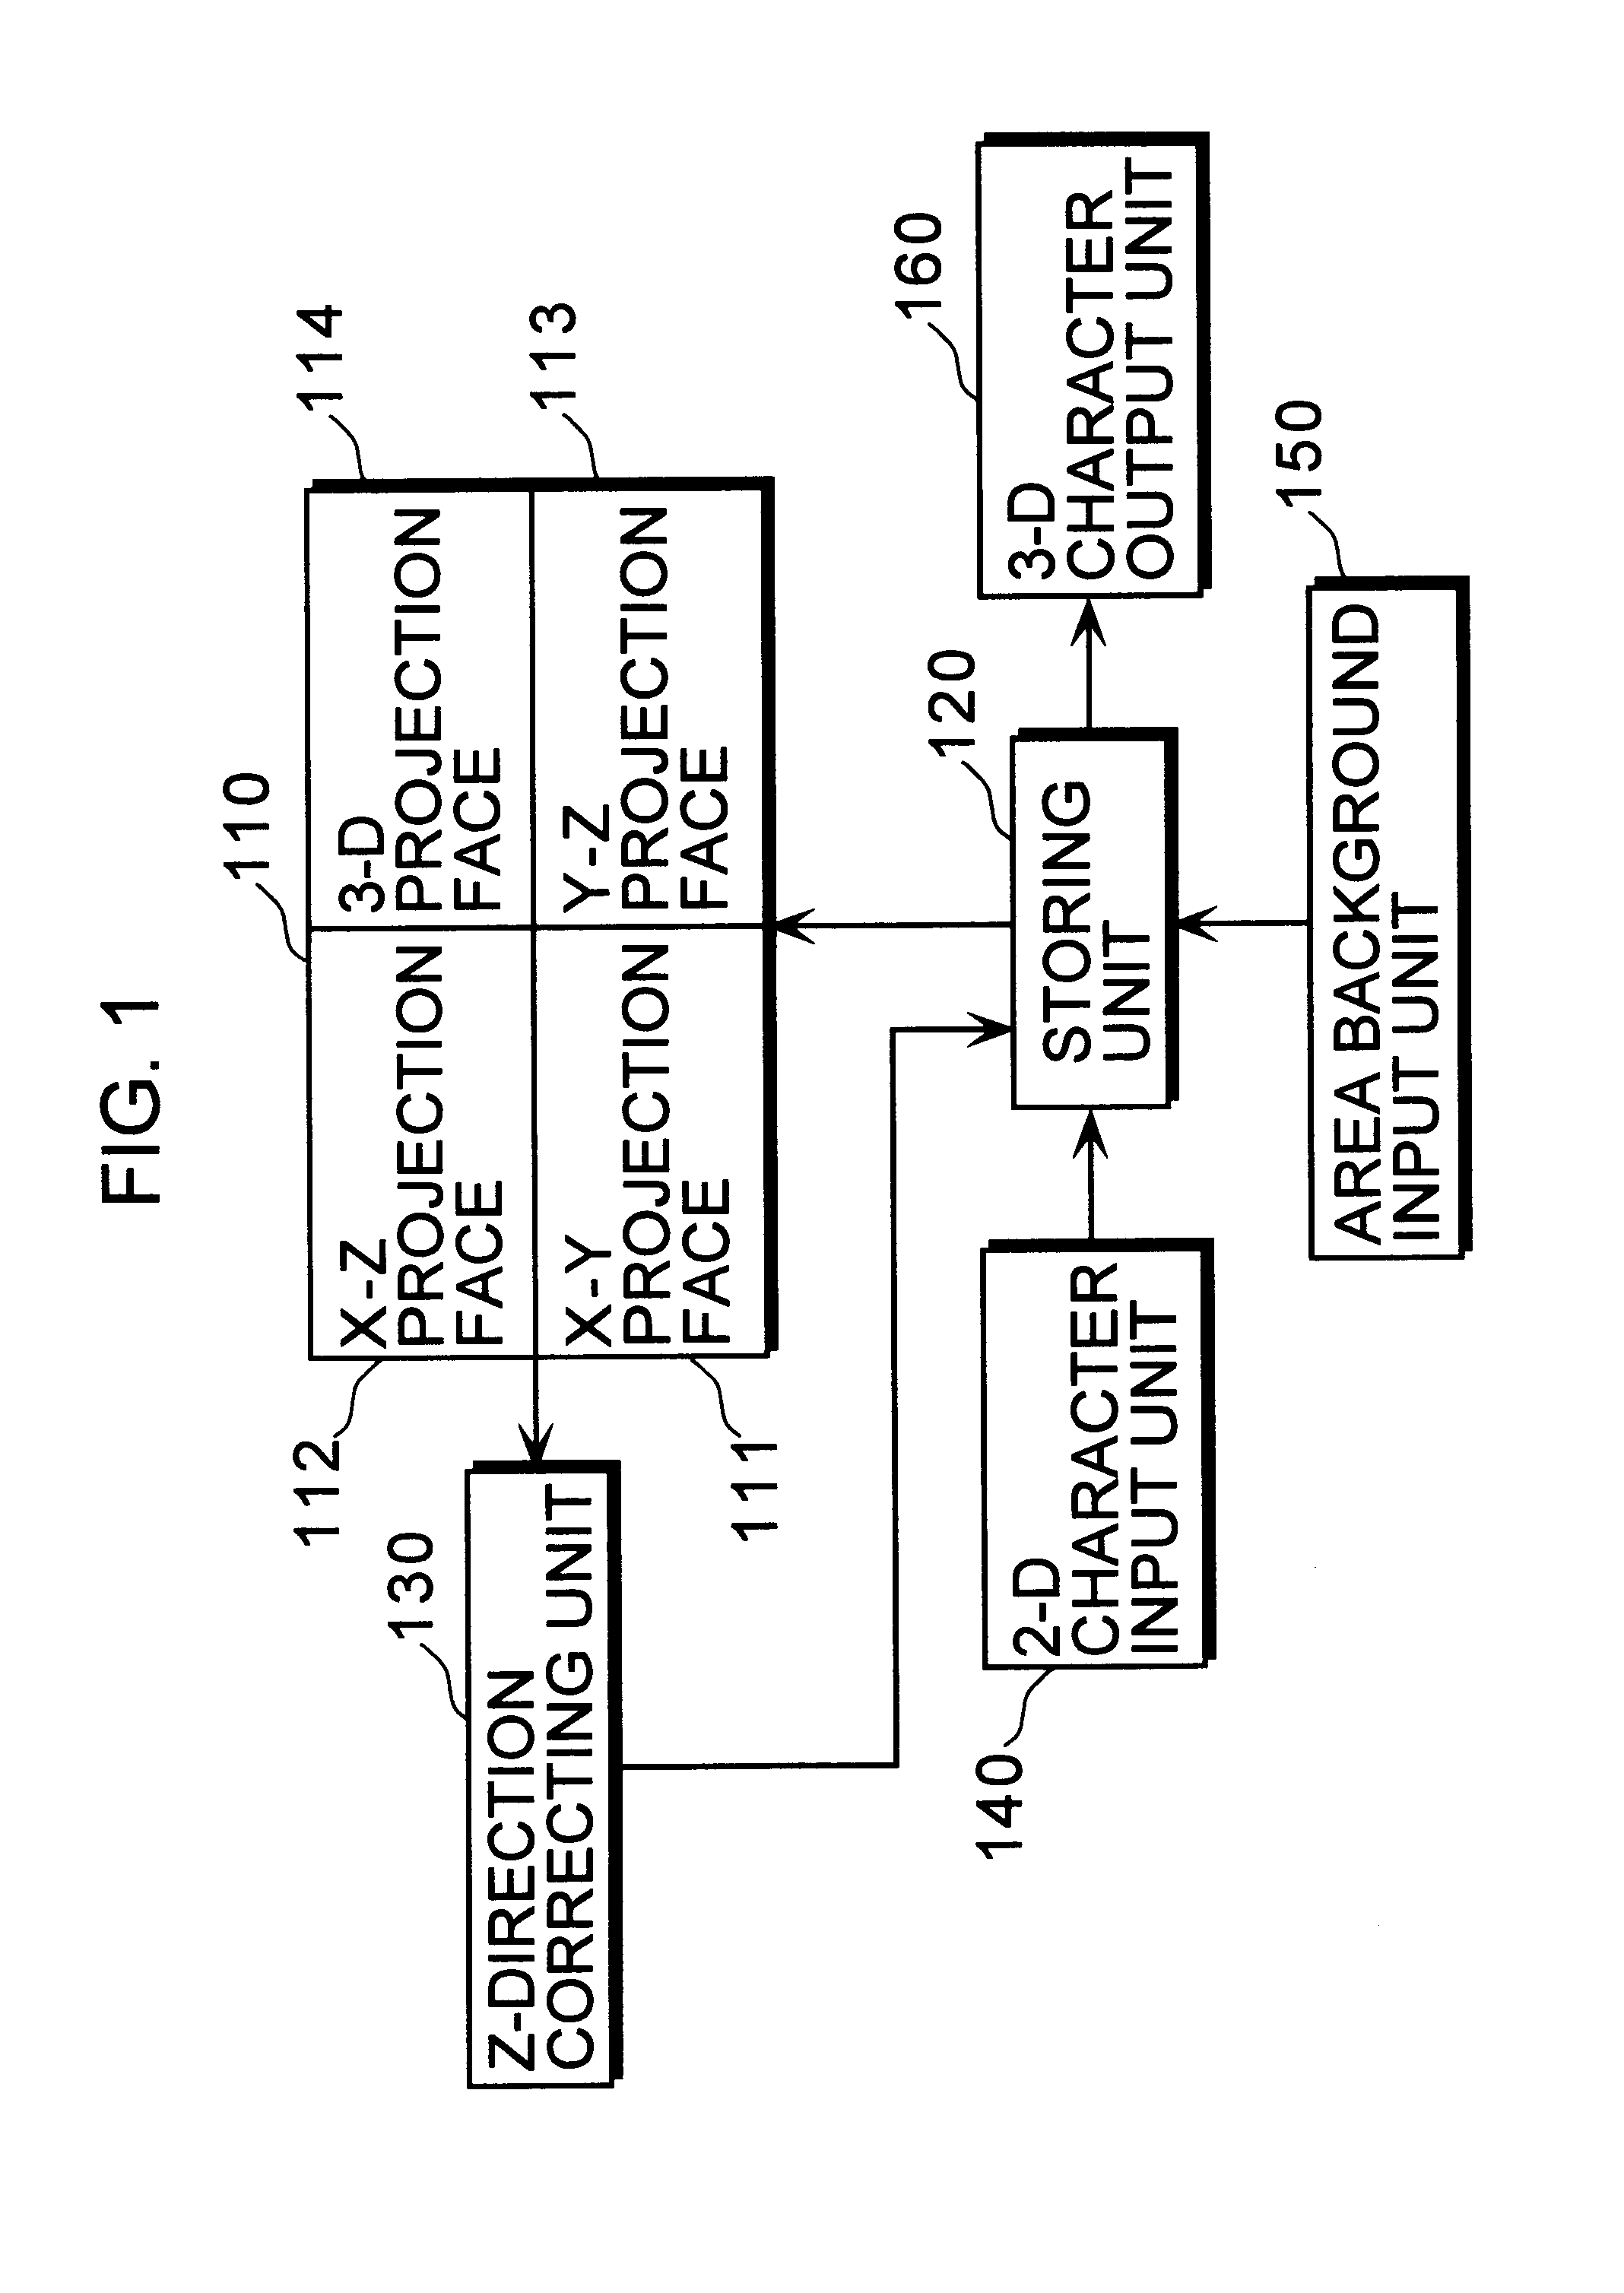 3-D character data generating device and a 3-D graphics data generating device